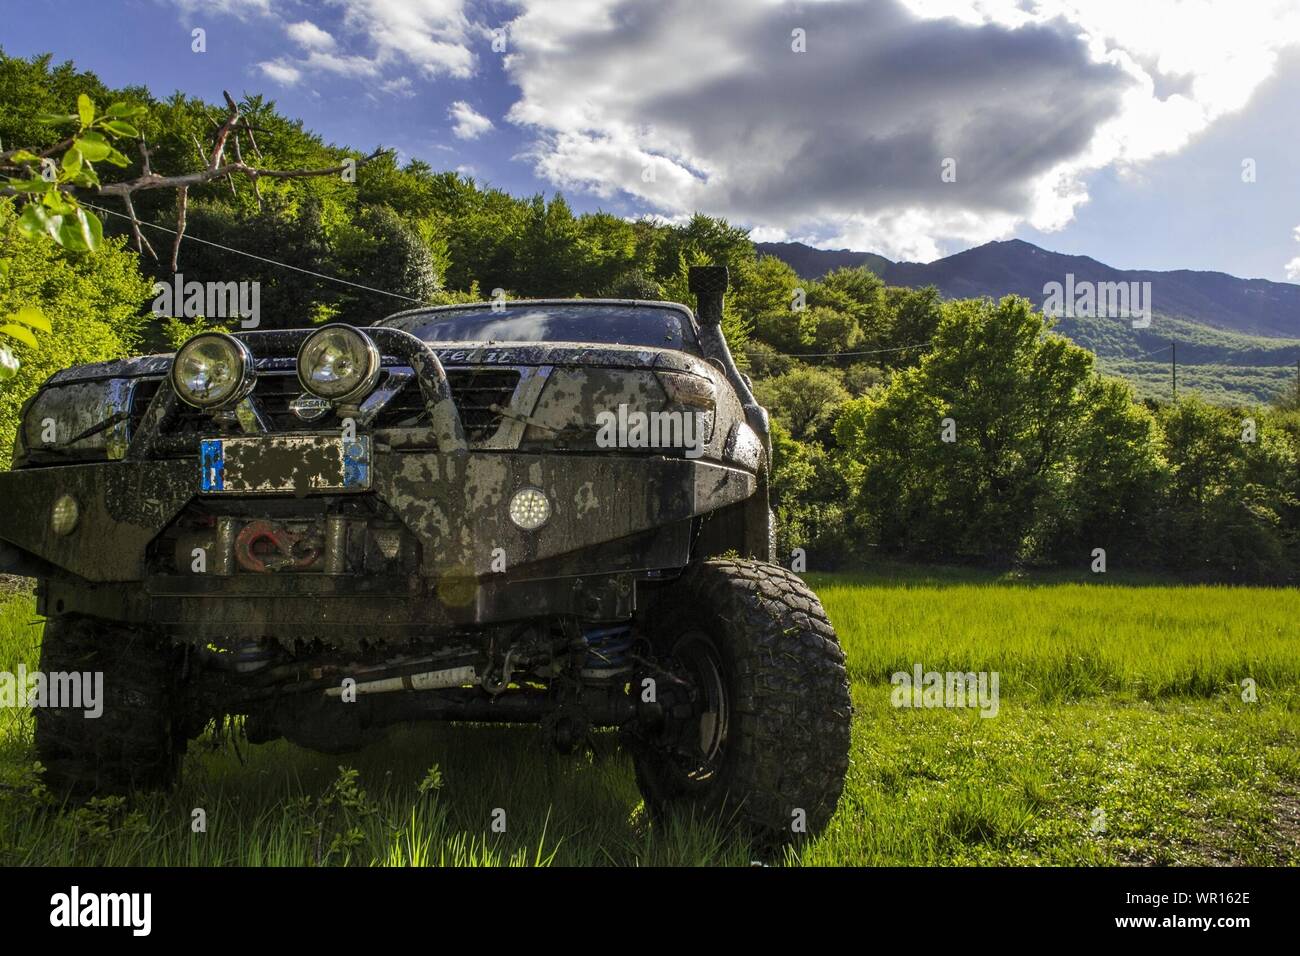 Dirty Sport Utility Vehicle On Grassy Field Stock Photo